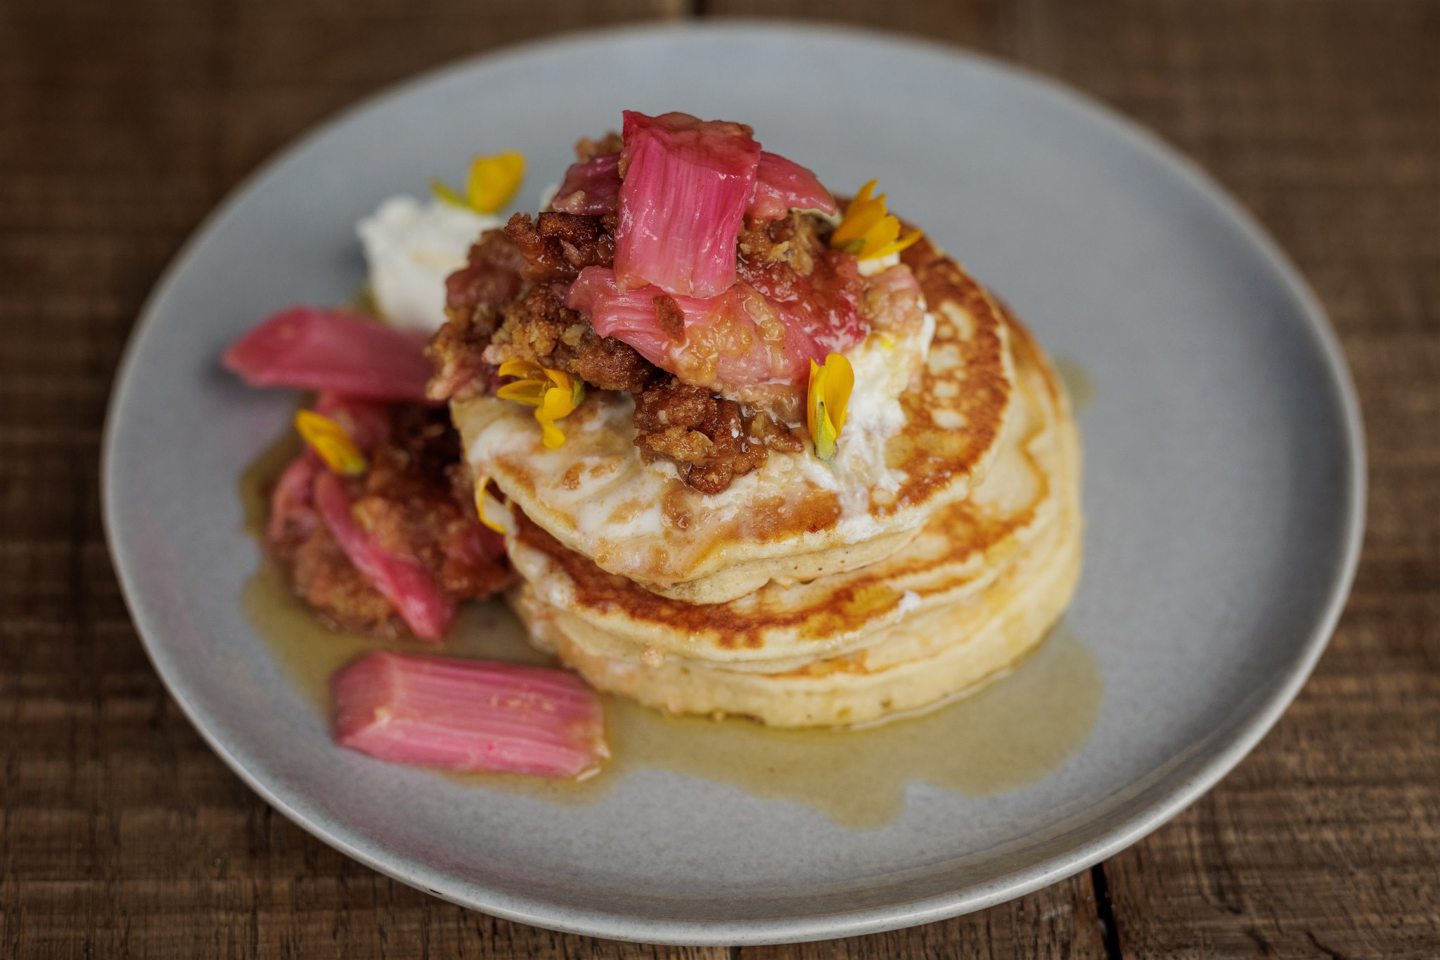 Scotch pancakes with rhubarb, gingernut crumble and gorse flower marscapone.